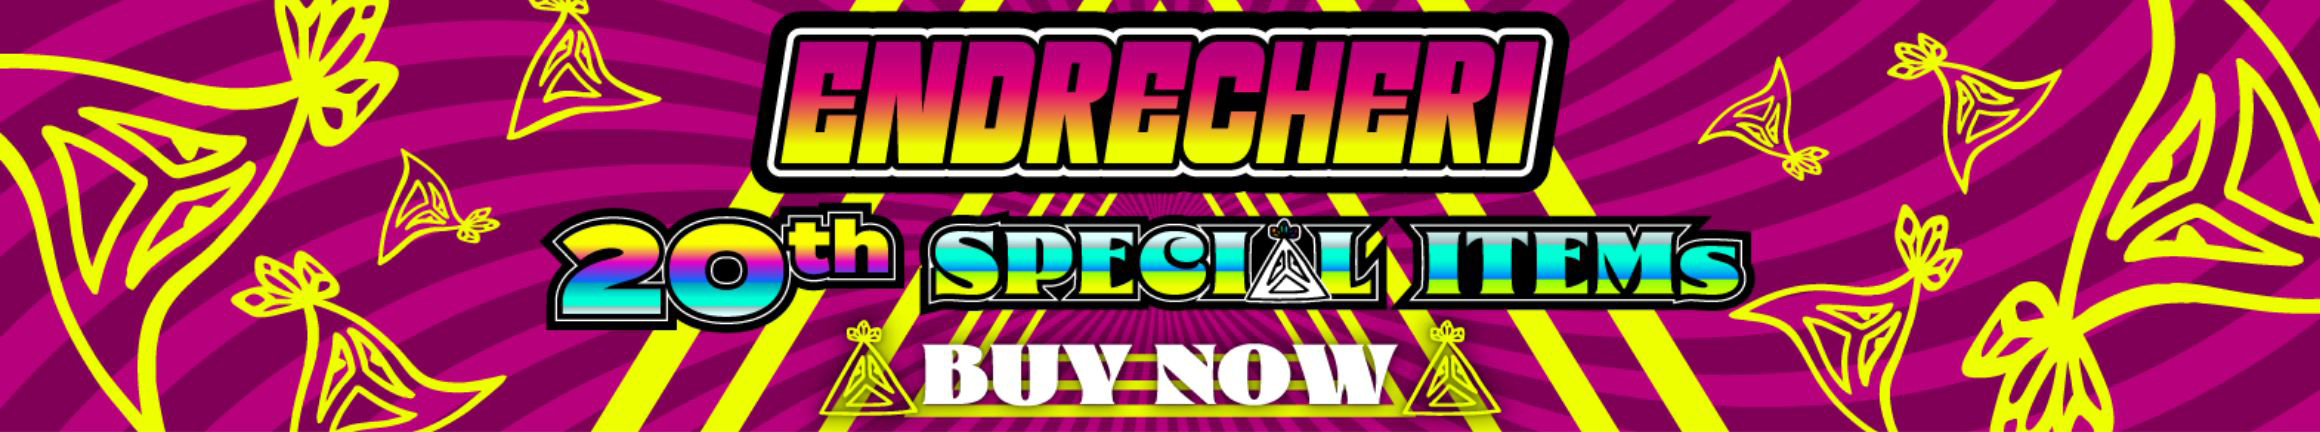 ENDRECHERI 20th Special ITEMS BUY NOW